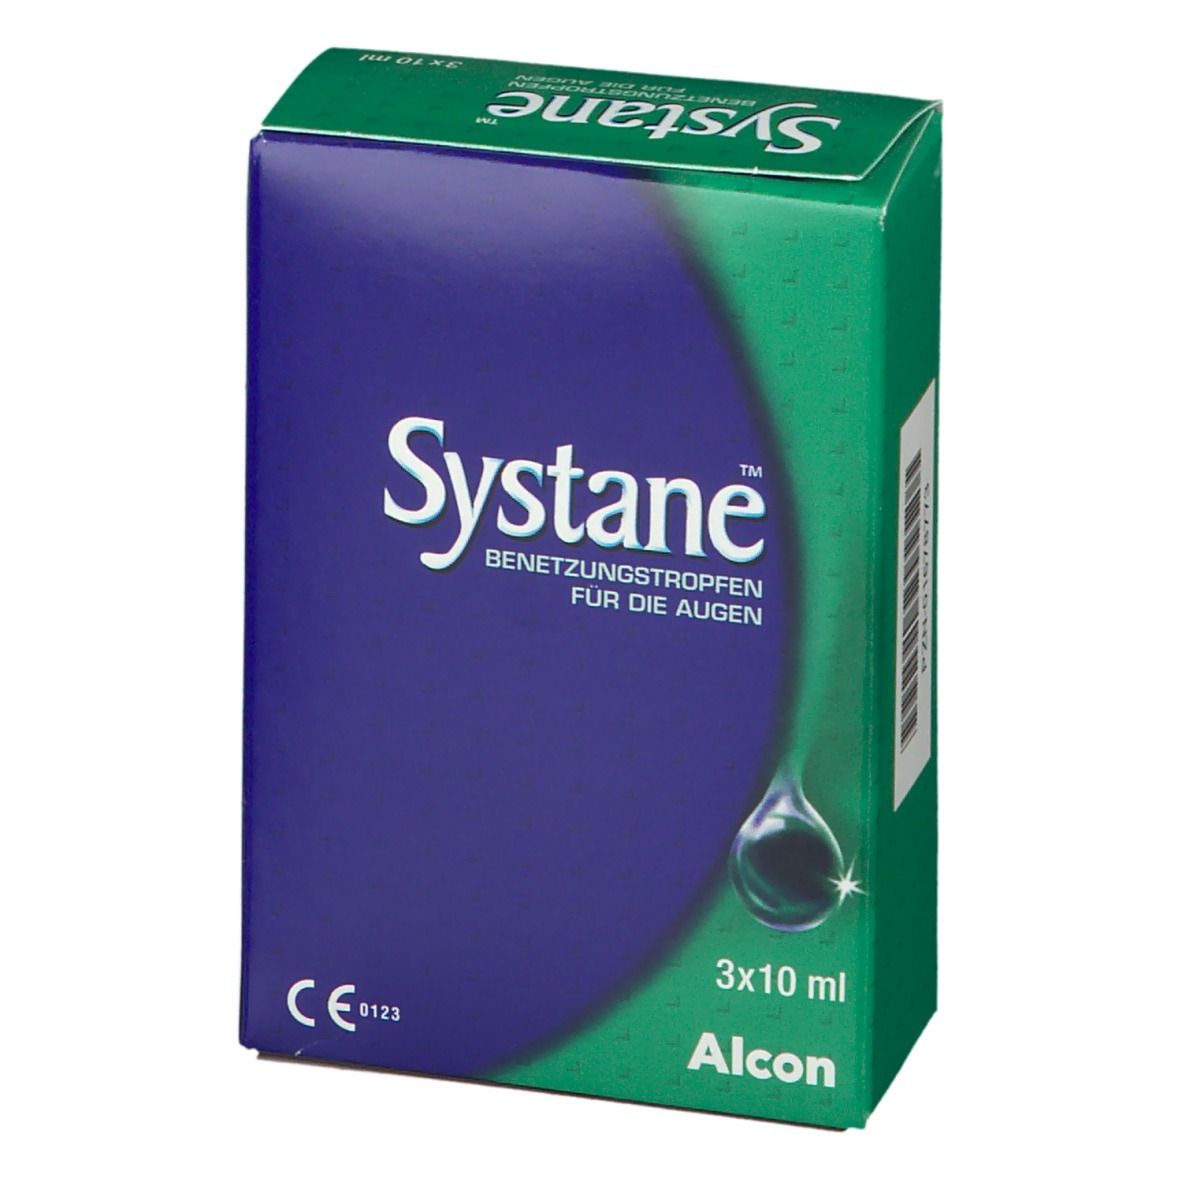 Systane®